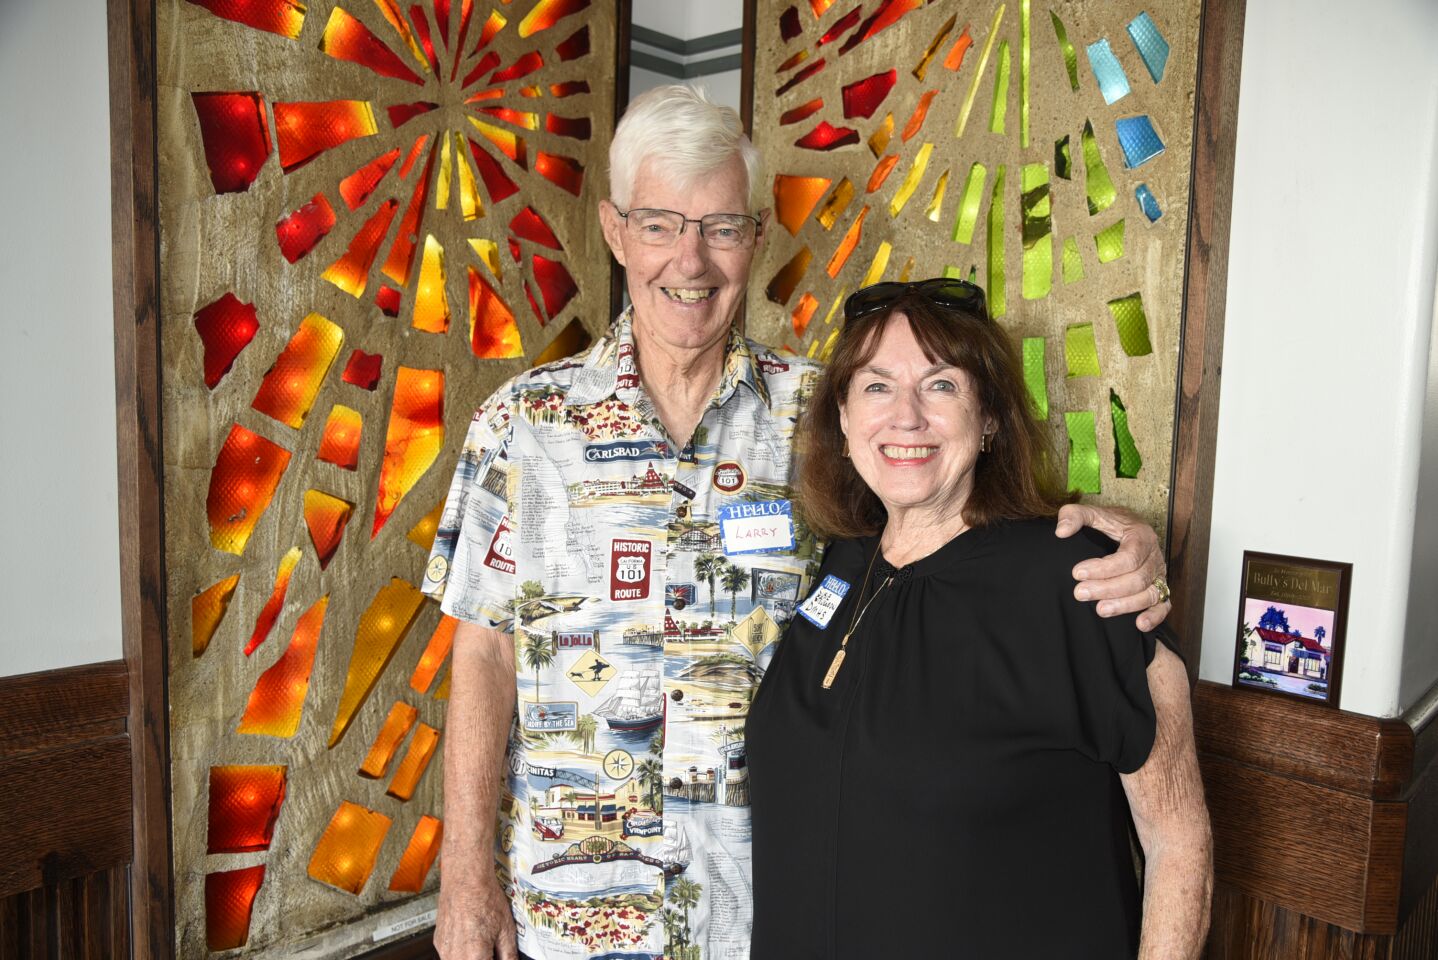 DMHS President Larry Brooks and Susie Stevenson with some of the stained-glass windows from Bullys